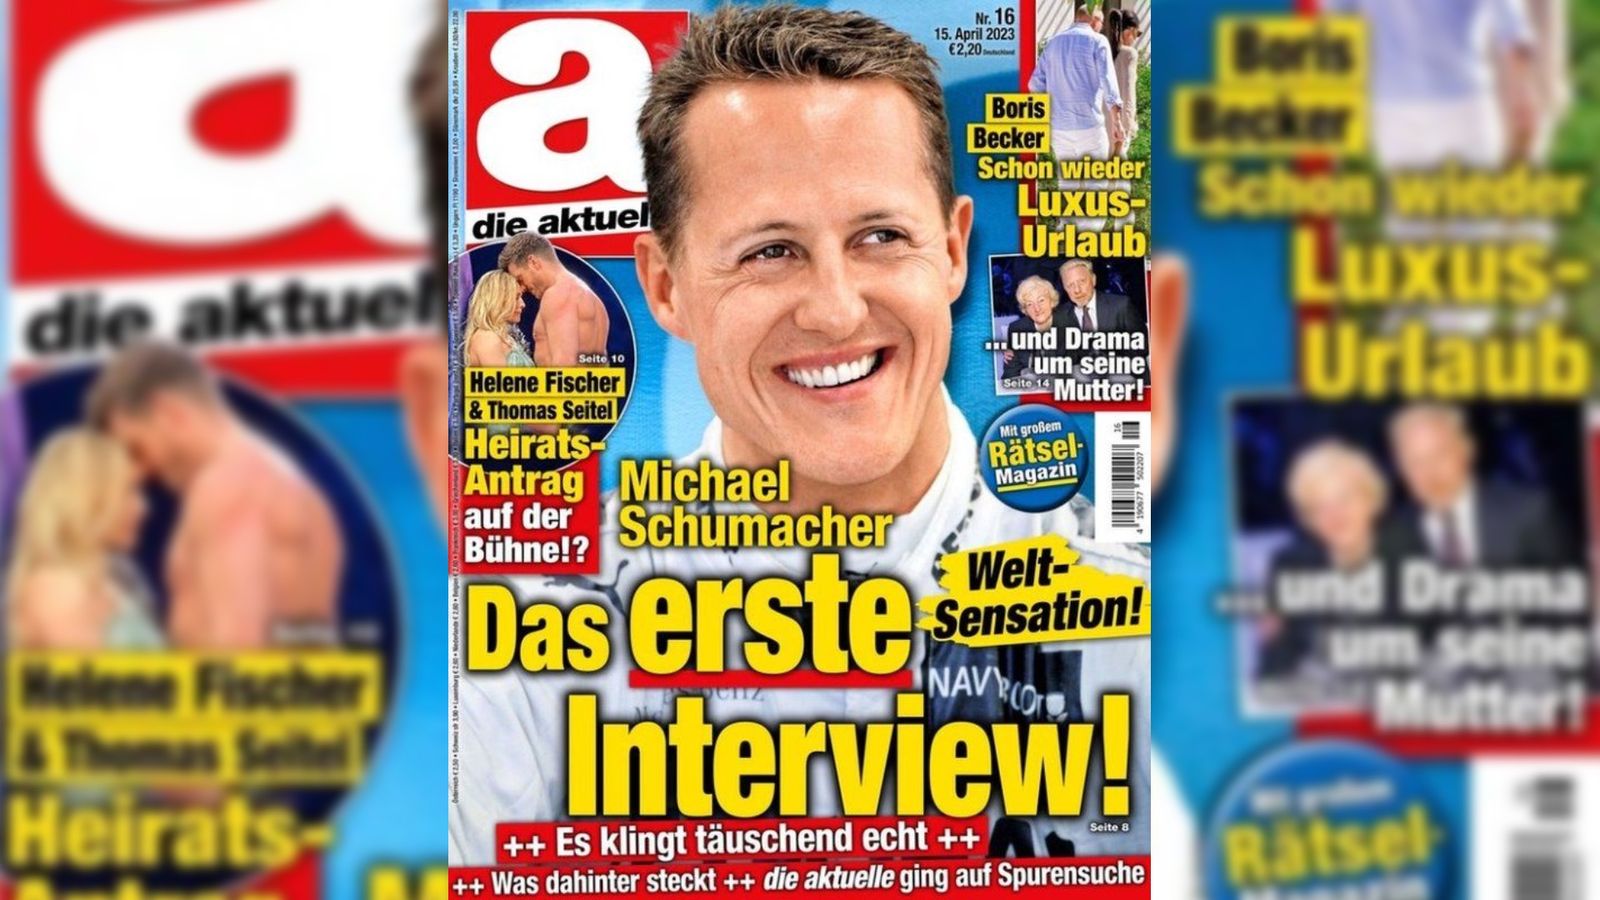 AI Schumacher interview causes lawsuit over false statements of injured ...